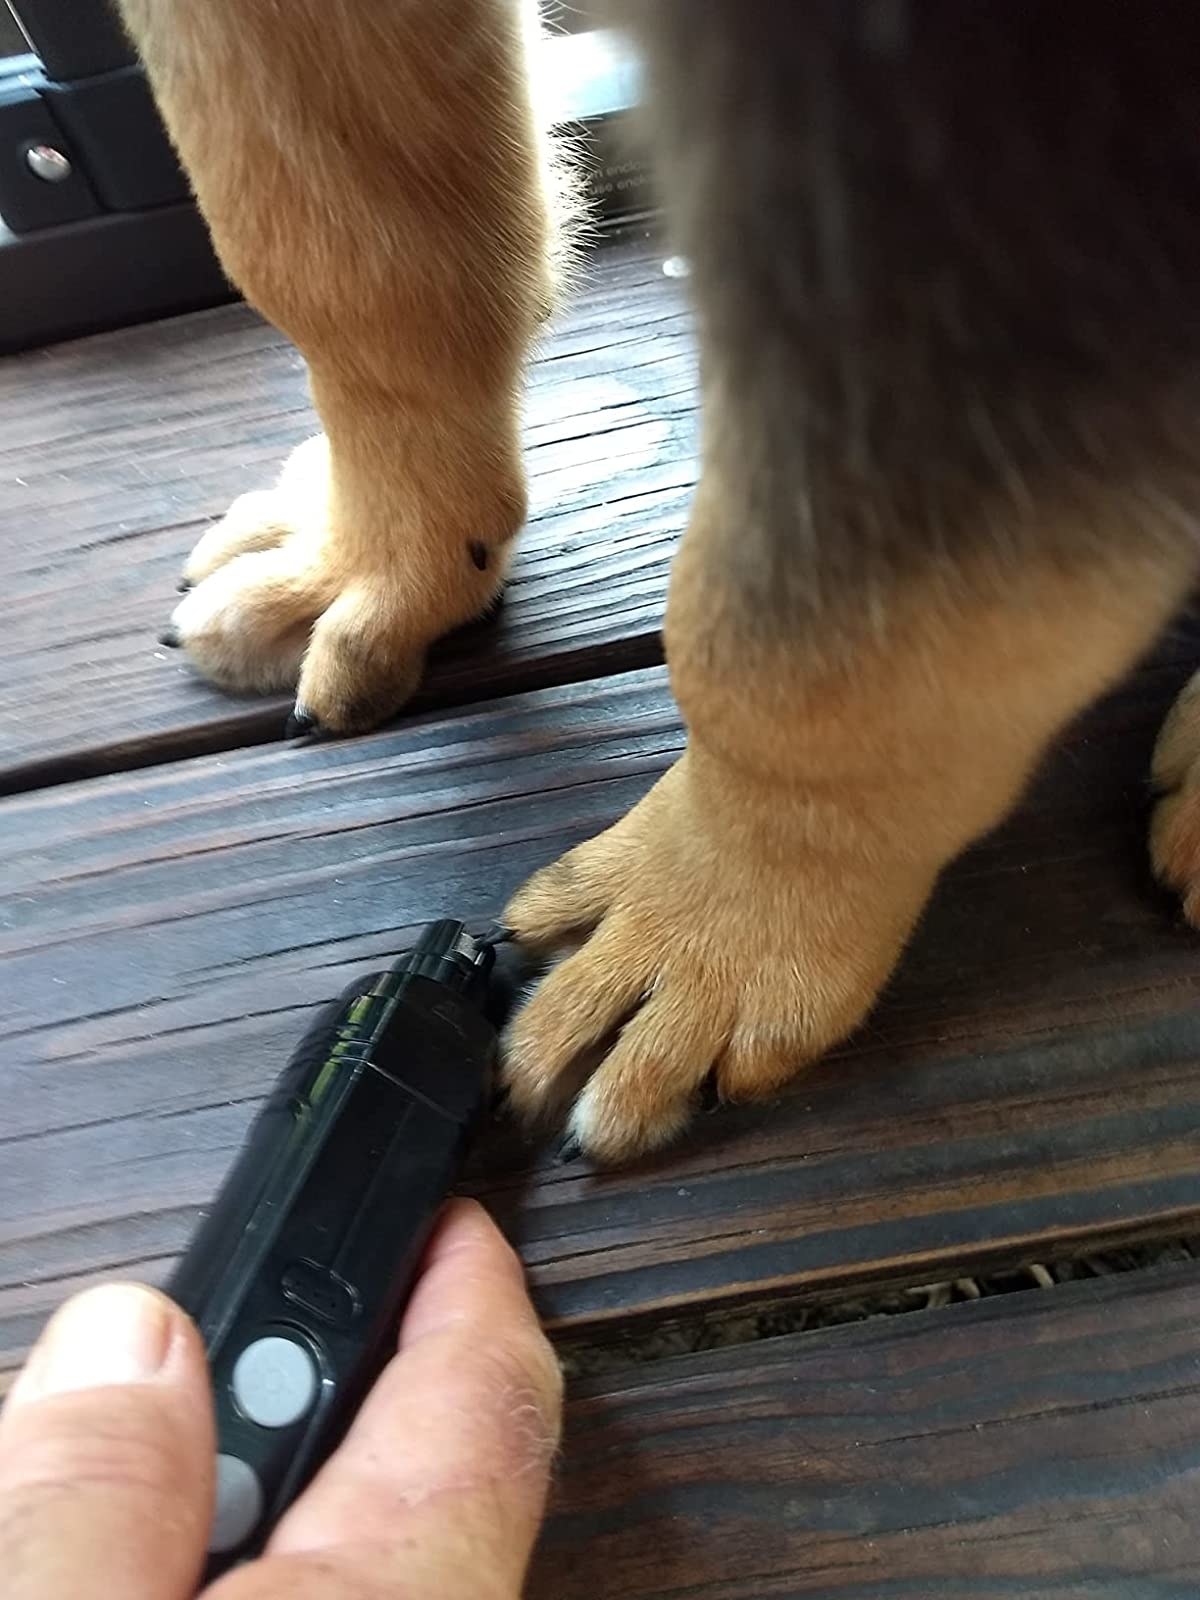 a reviewer photo of the black grinder being held against the nails of a dog with tan paws